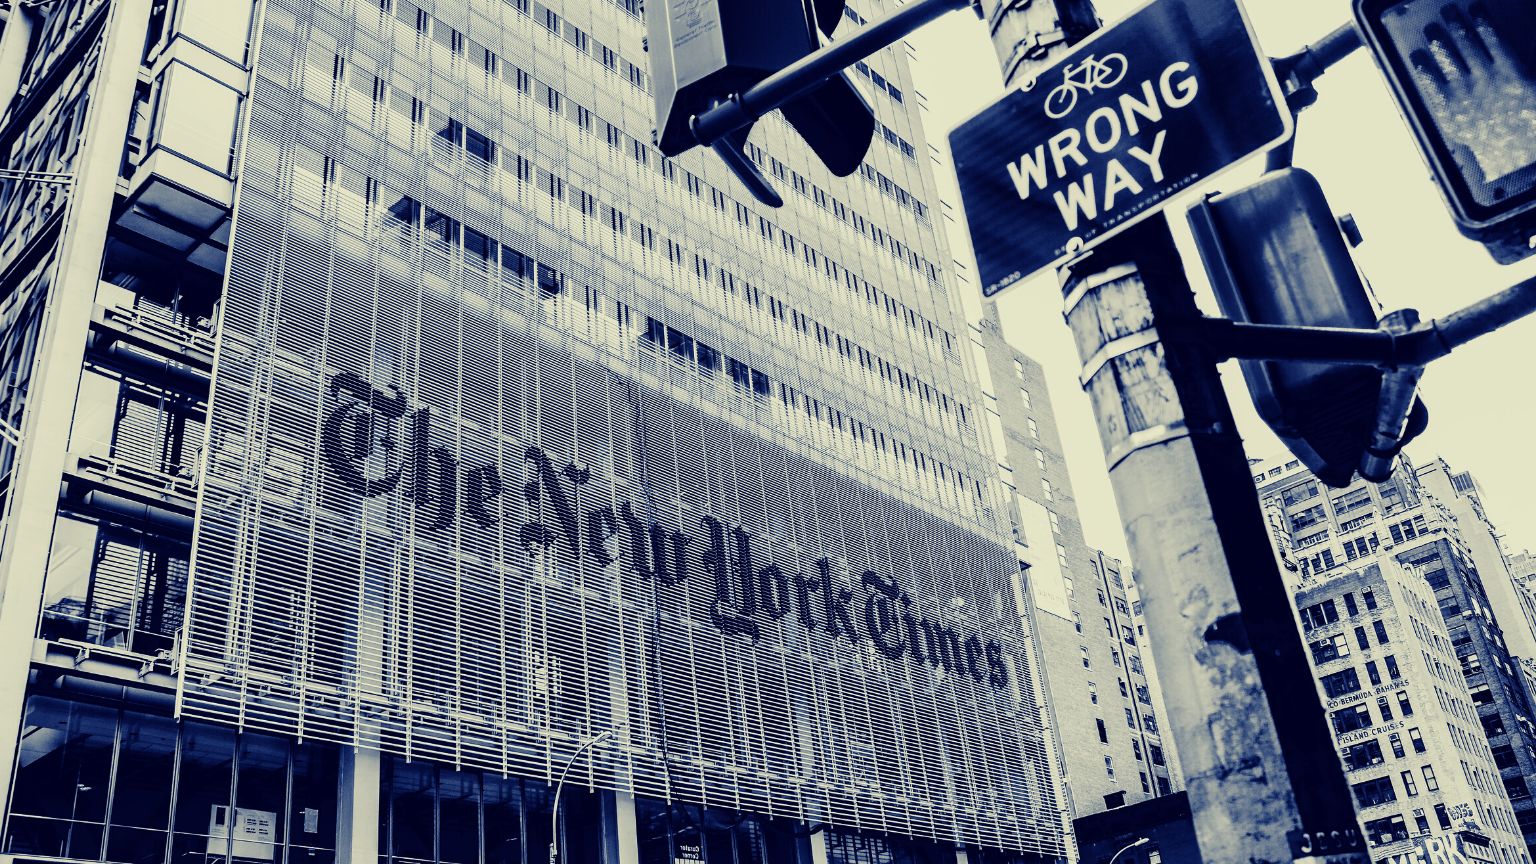 New York Times: The First Amendment is a “barrier” to combating “disinformation”